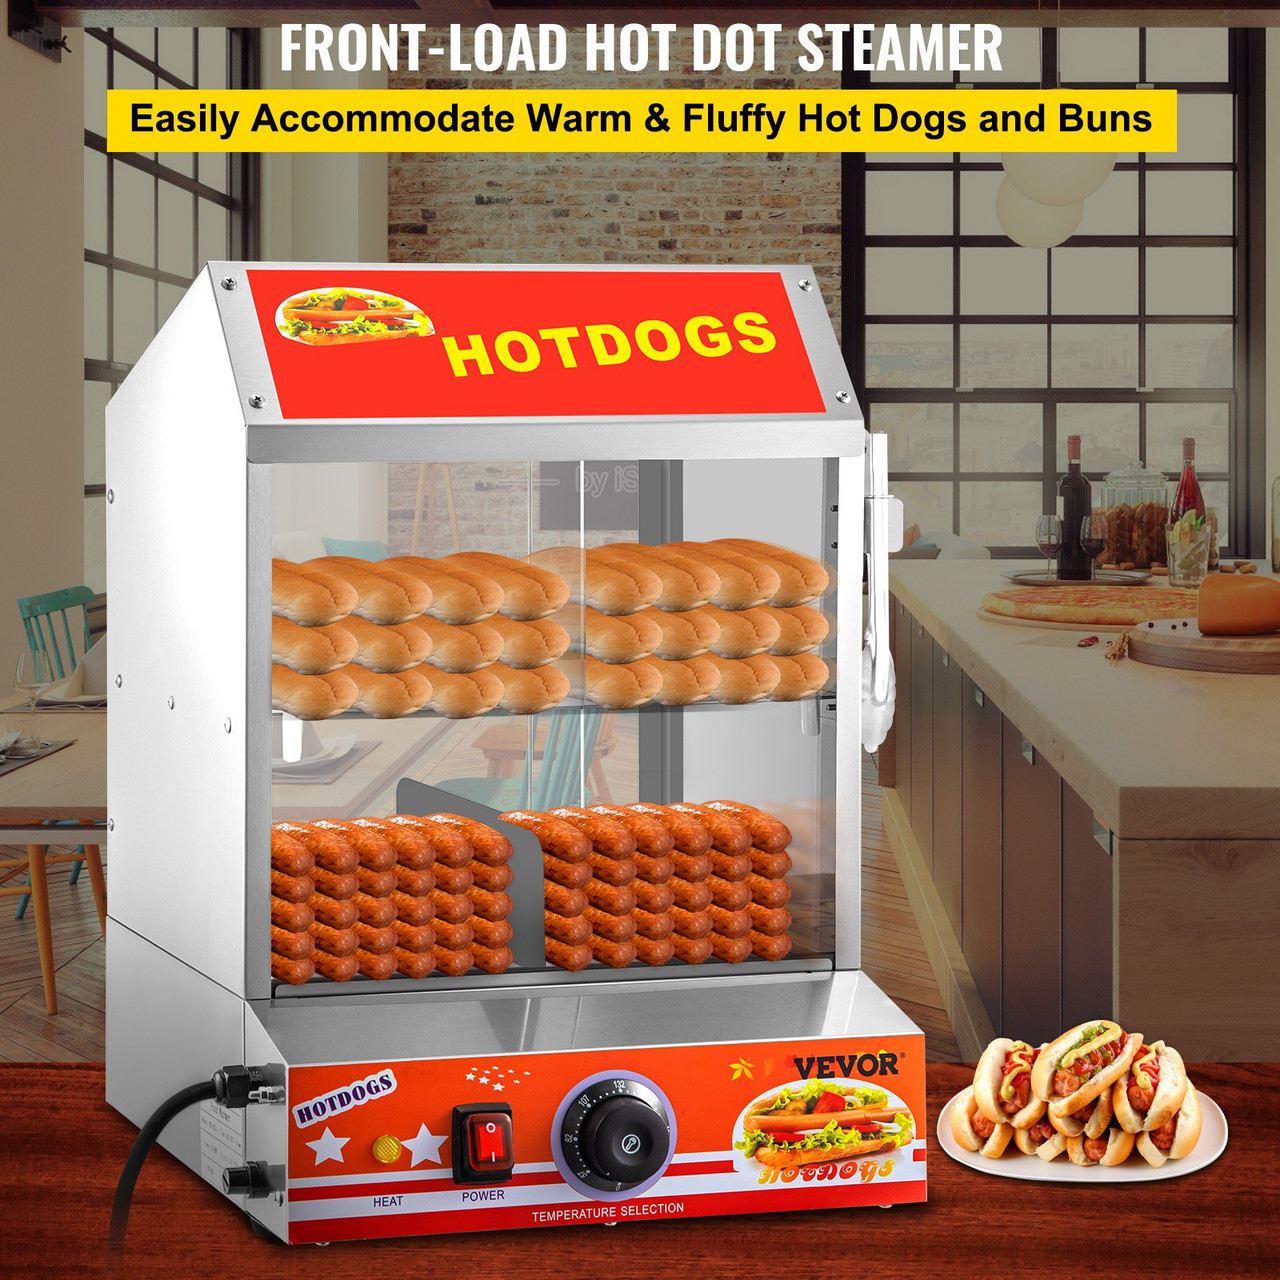 Hot Dog Steamer, 27L/24.52Qt, 2-Tier Hut Steamer for 175 Hot Dogs & 40 Buns, Electric Bun Warmer Cooker with Tempered Glass Slide Doors Partition Plate Food Clip PTFE Tape, Stainless Steel